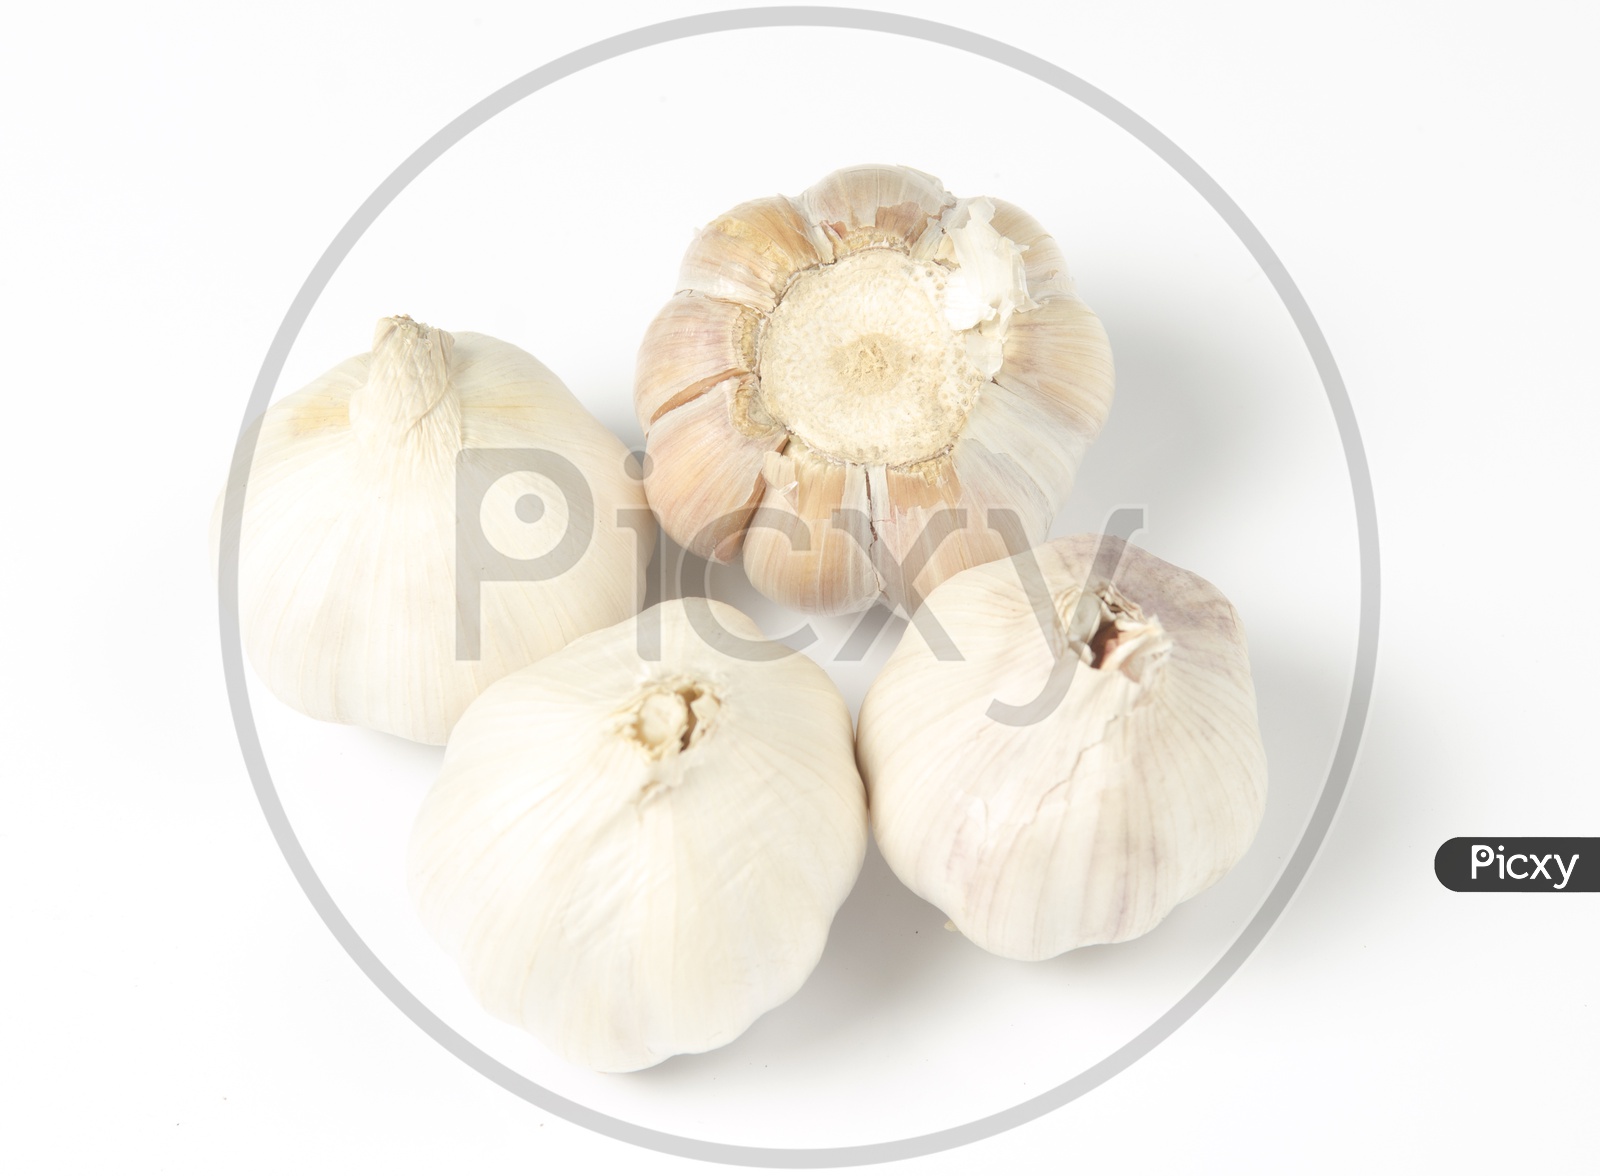 Garlic head detail isolated on white background